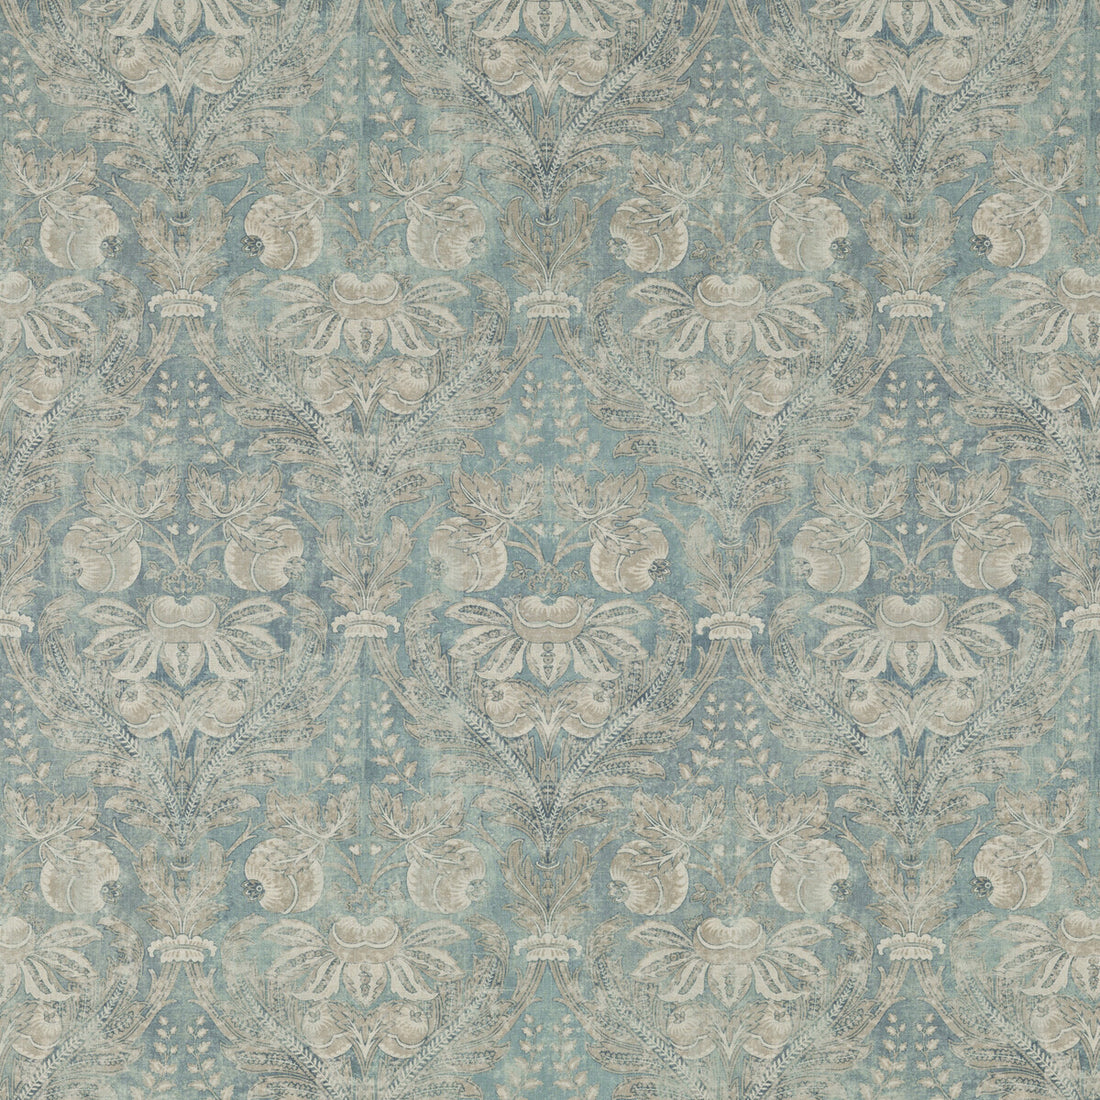 Lapura Damask fabric in blue color - pattern BP10828.1.0 - by G P &amp; J Baker in the Coromandel collection